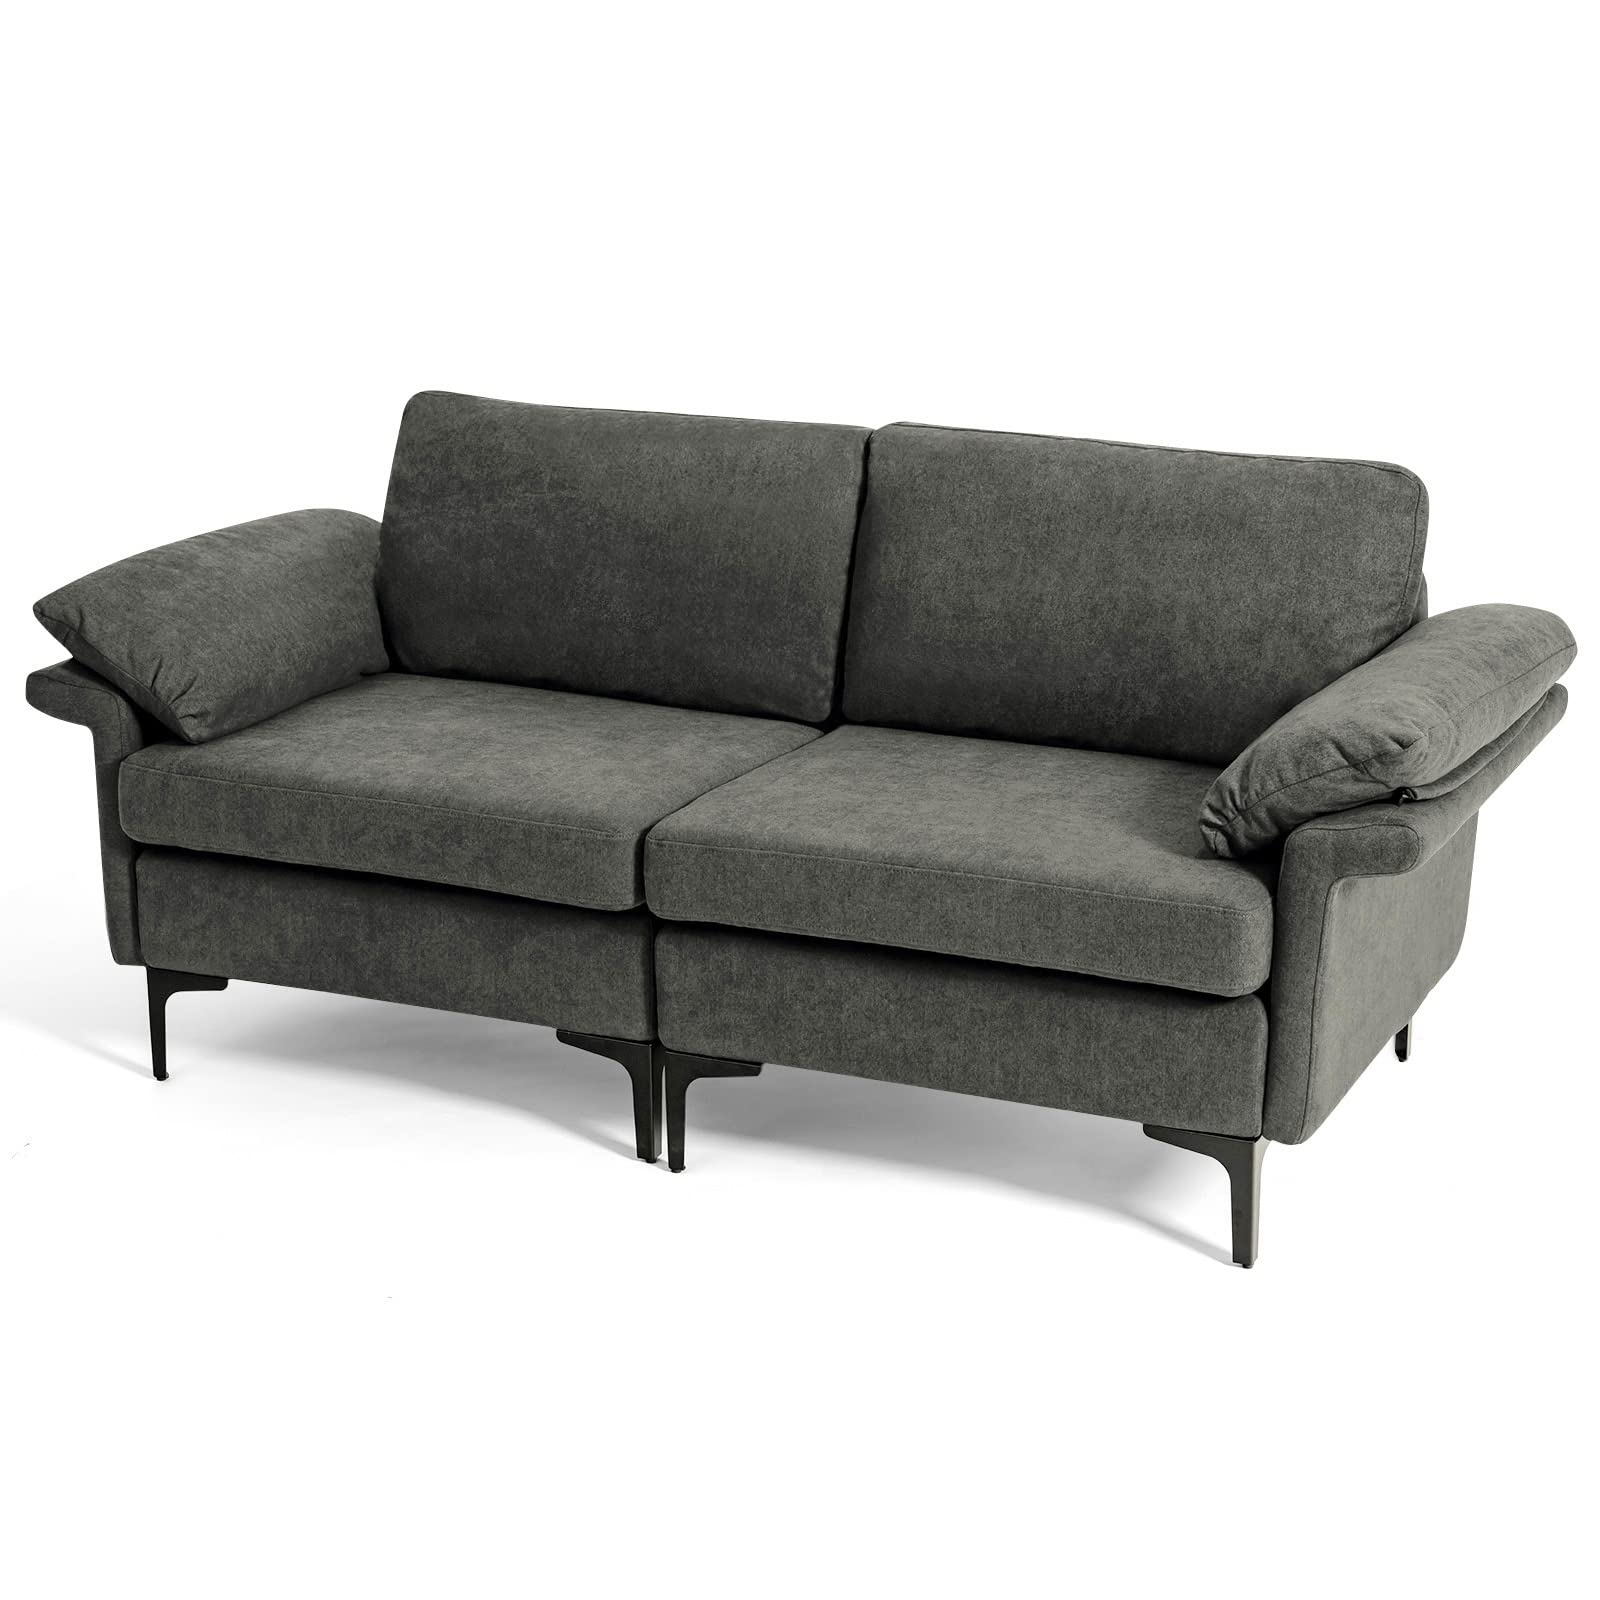 Giantex 72.5" L Loveseat, 2-Seat Sofa Couch with Removable Armrest Pillows